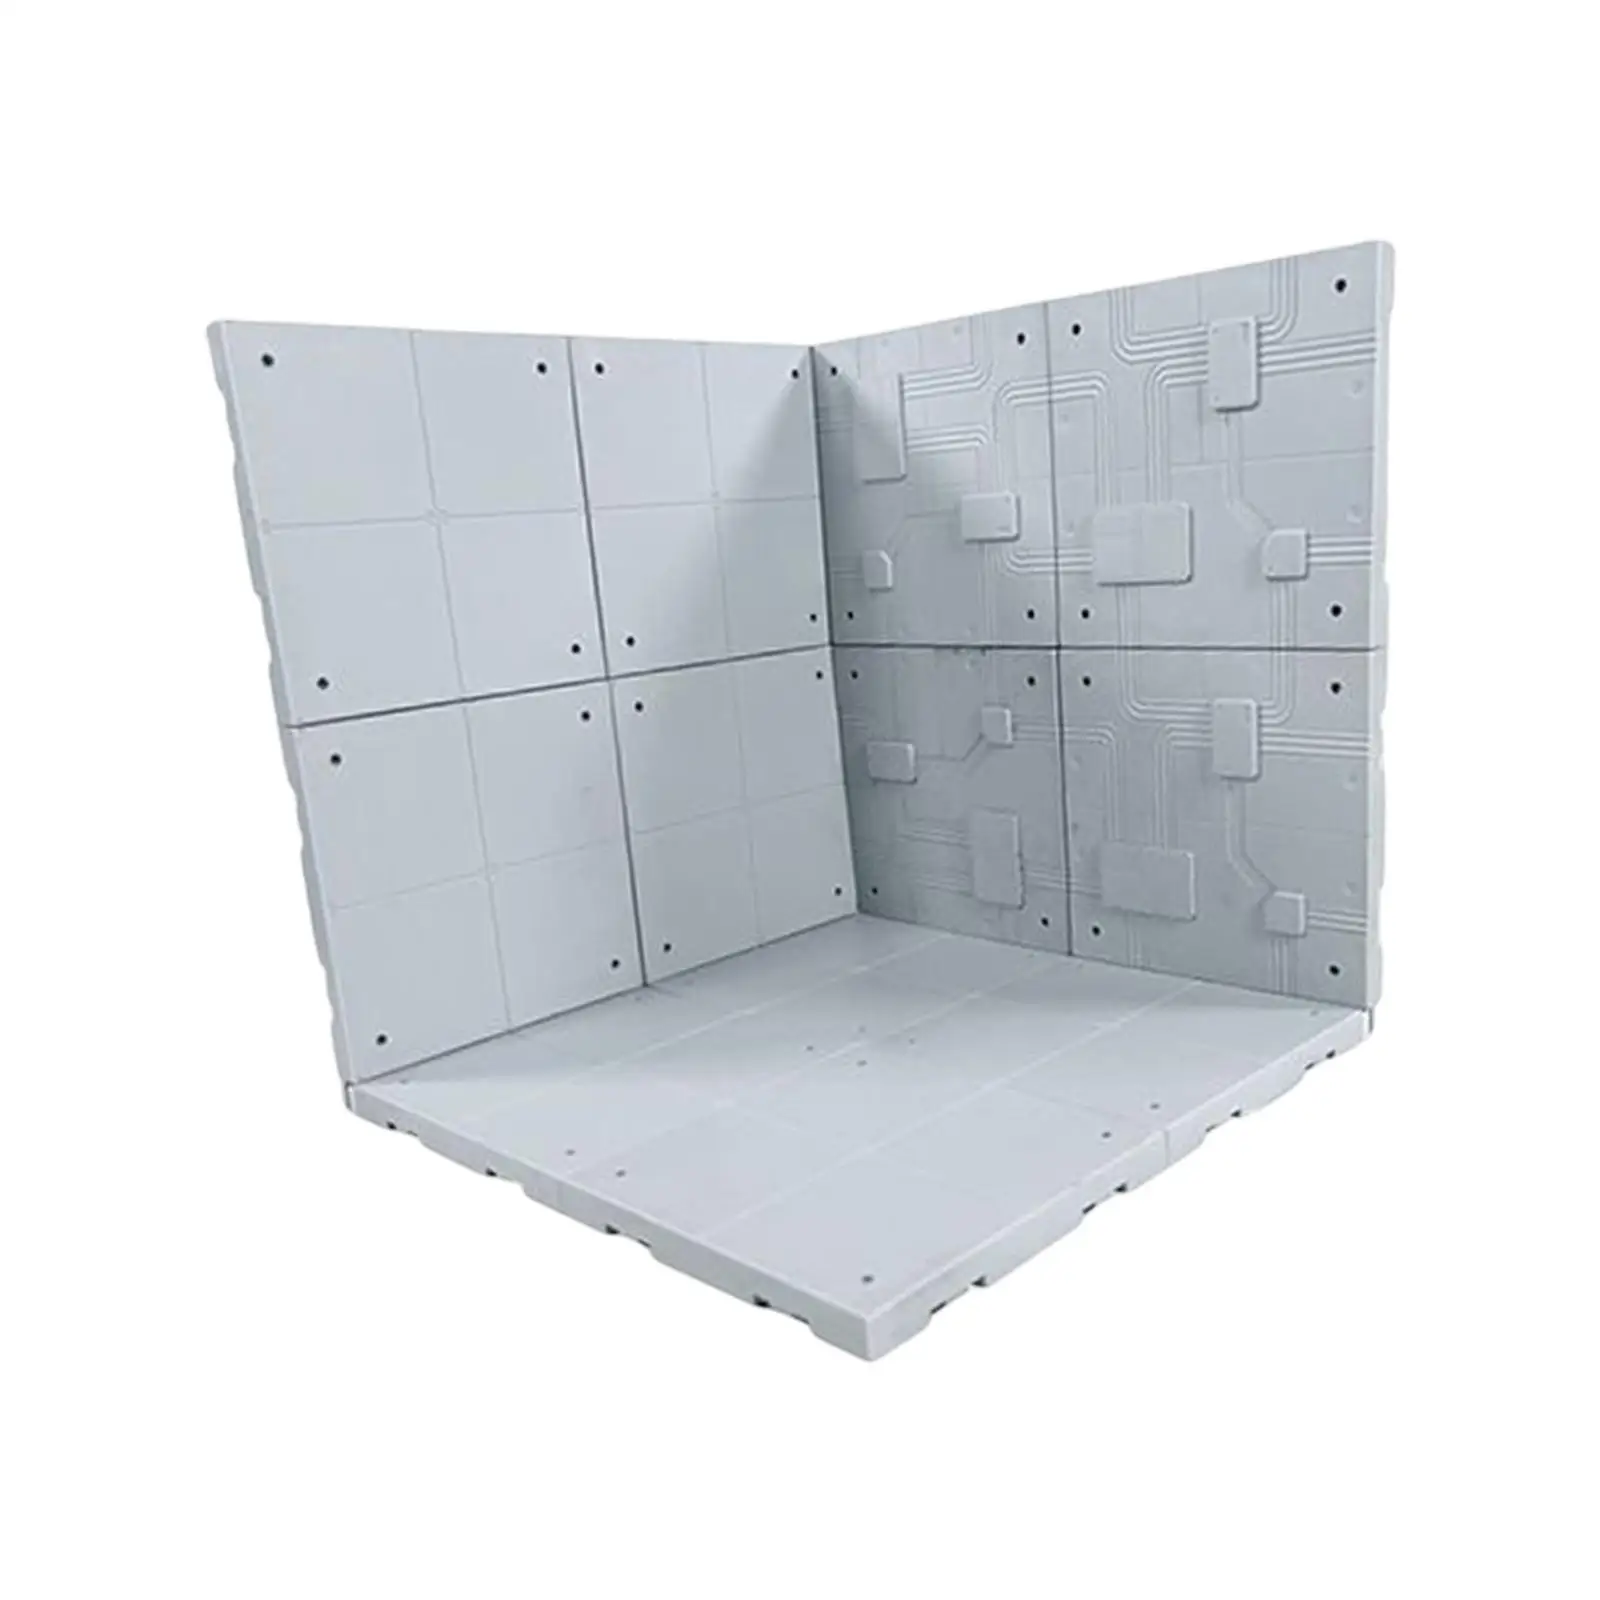 Durable Model Display Background Decoration Gifts Organizer Diorama Layout